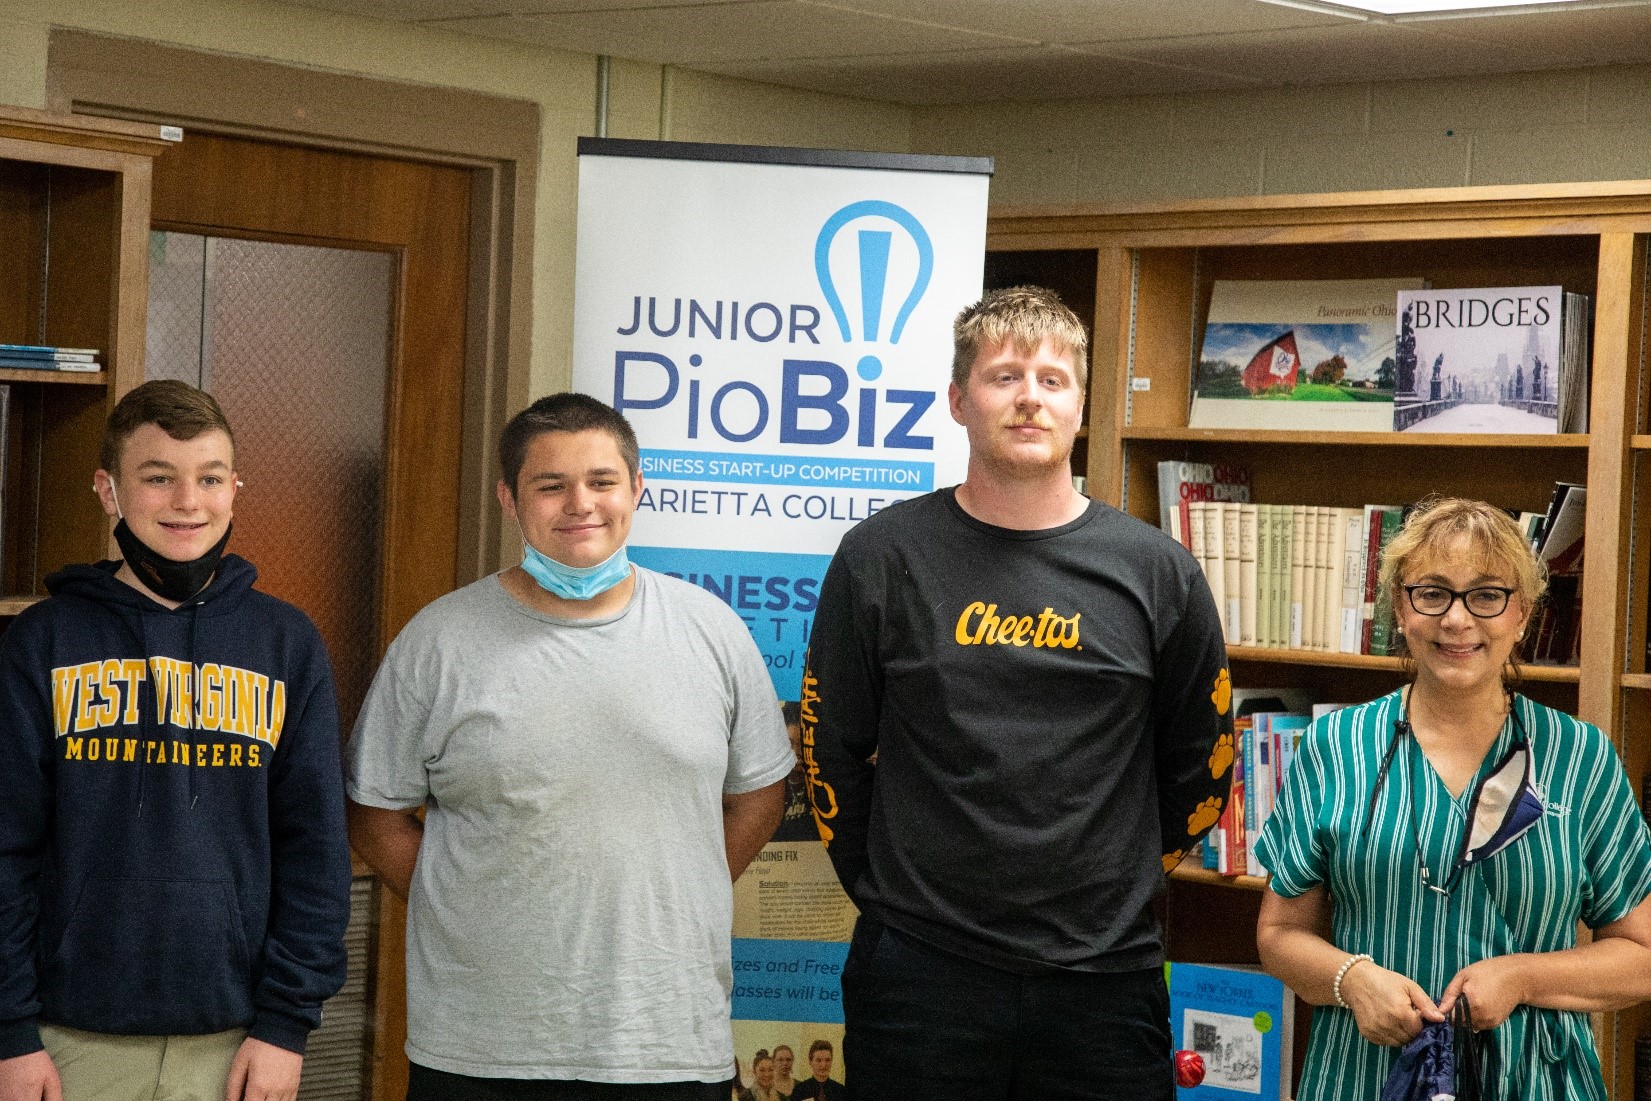 Dr. Khorassani visited Belpre High School to present the fifth-Place award to Christopher Clem, Trent Cox, Cody Daugherty and Cody Hess for their project “Project Mask On”.